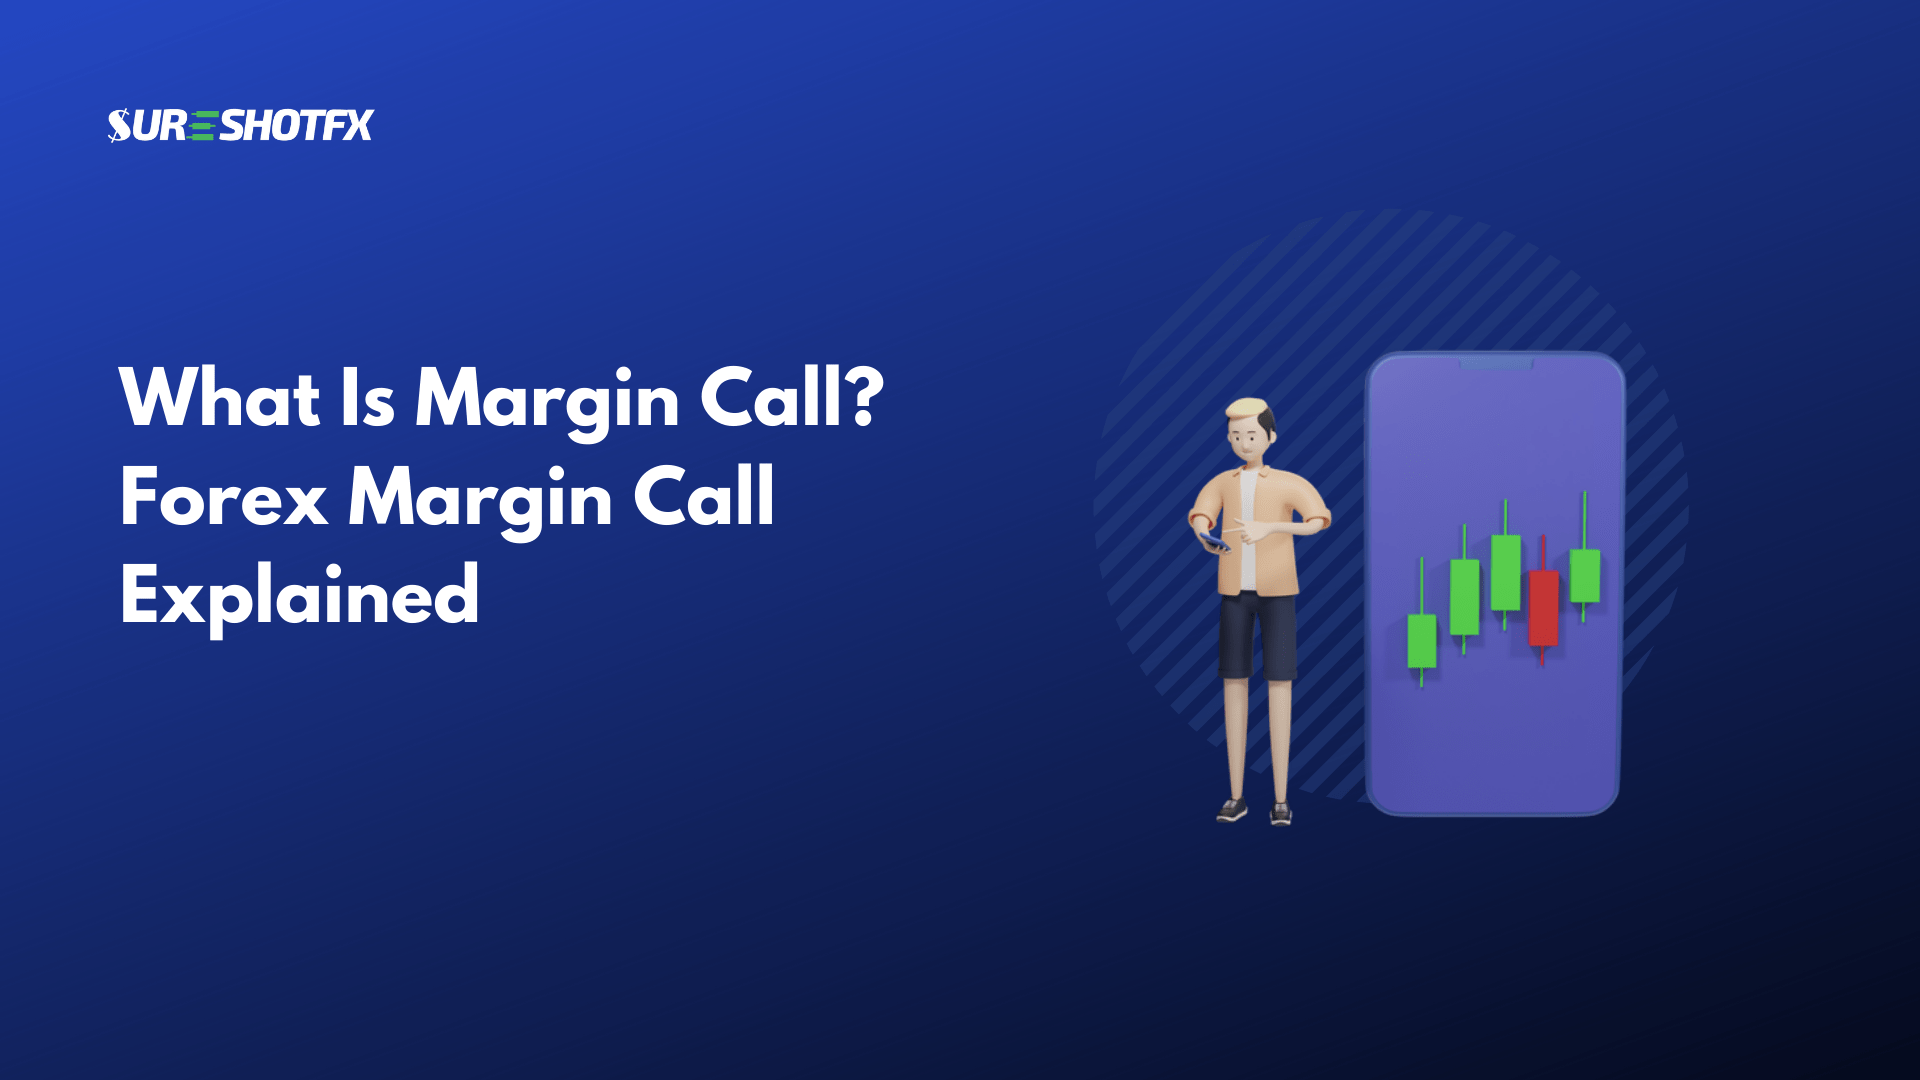 What is margin call in forex? Forex margin call explained